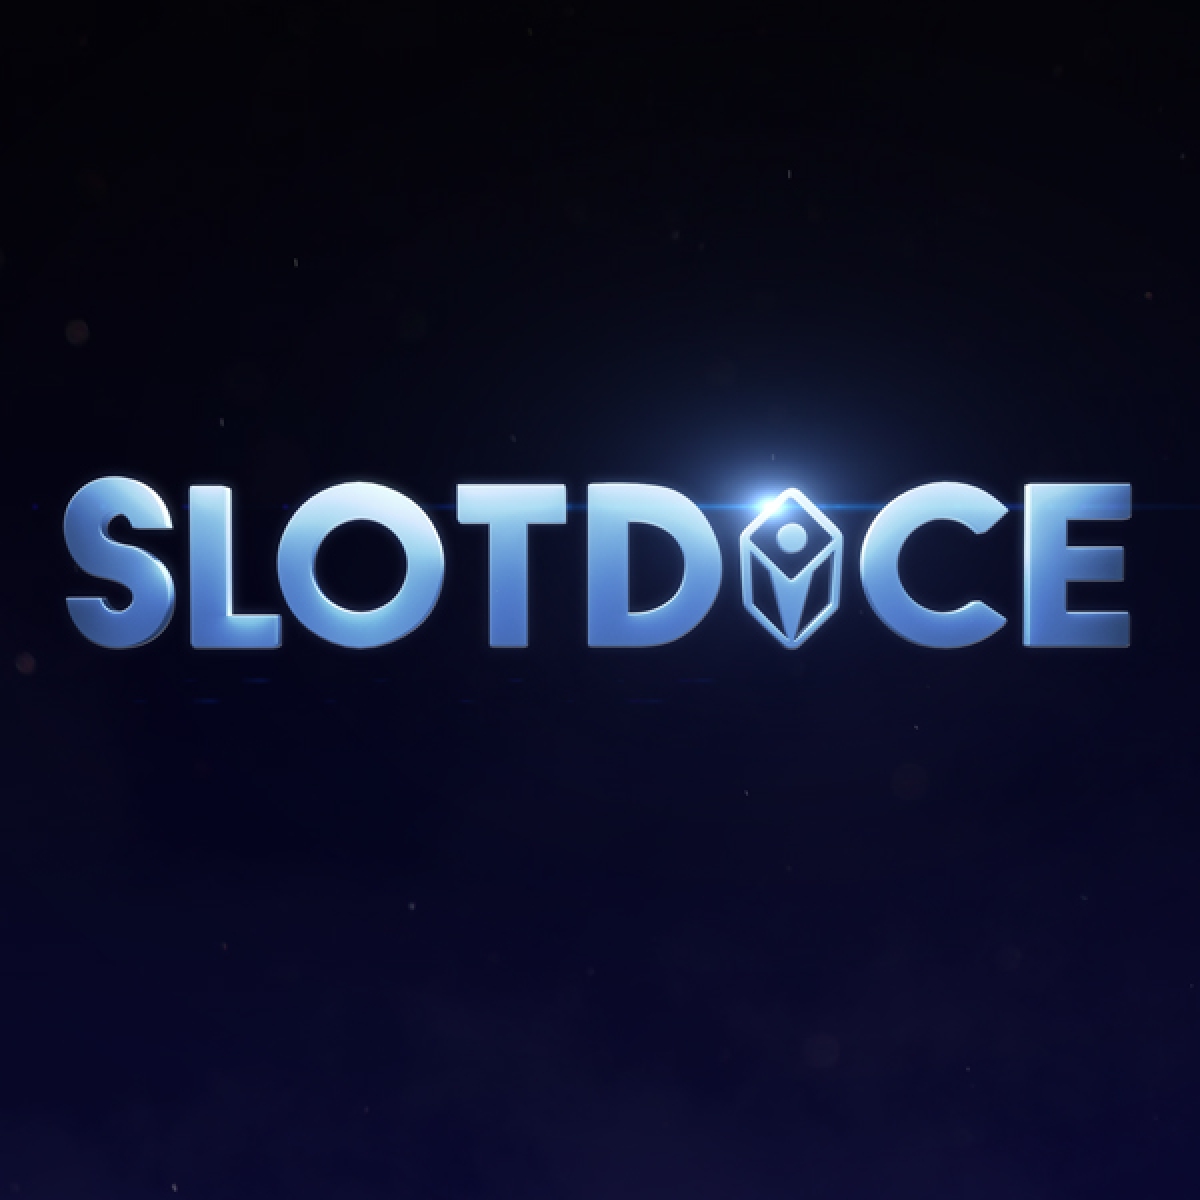 The Slotdice Online Slot Demo Game by DiceLab